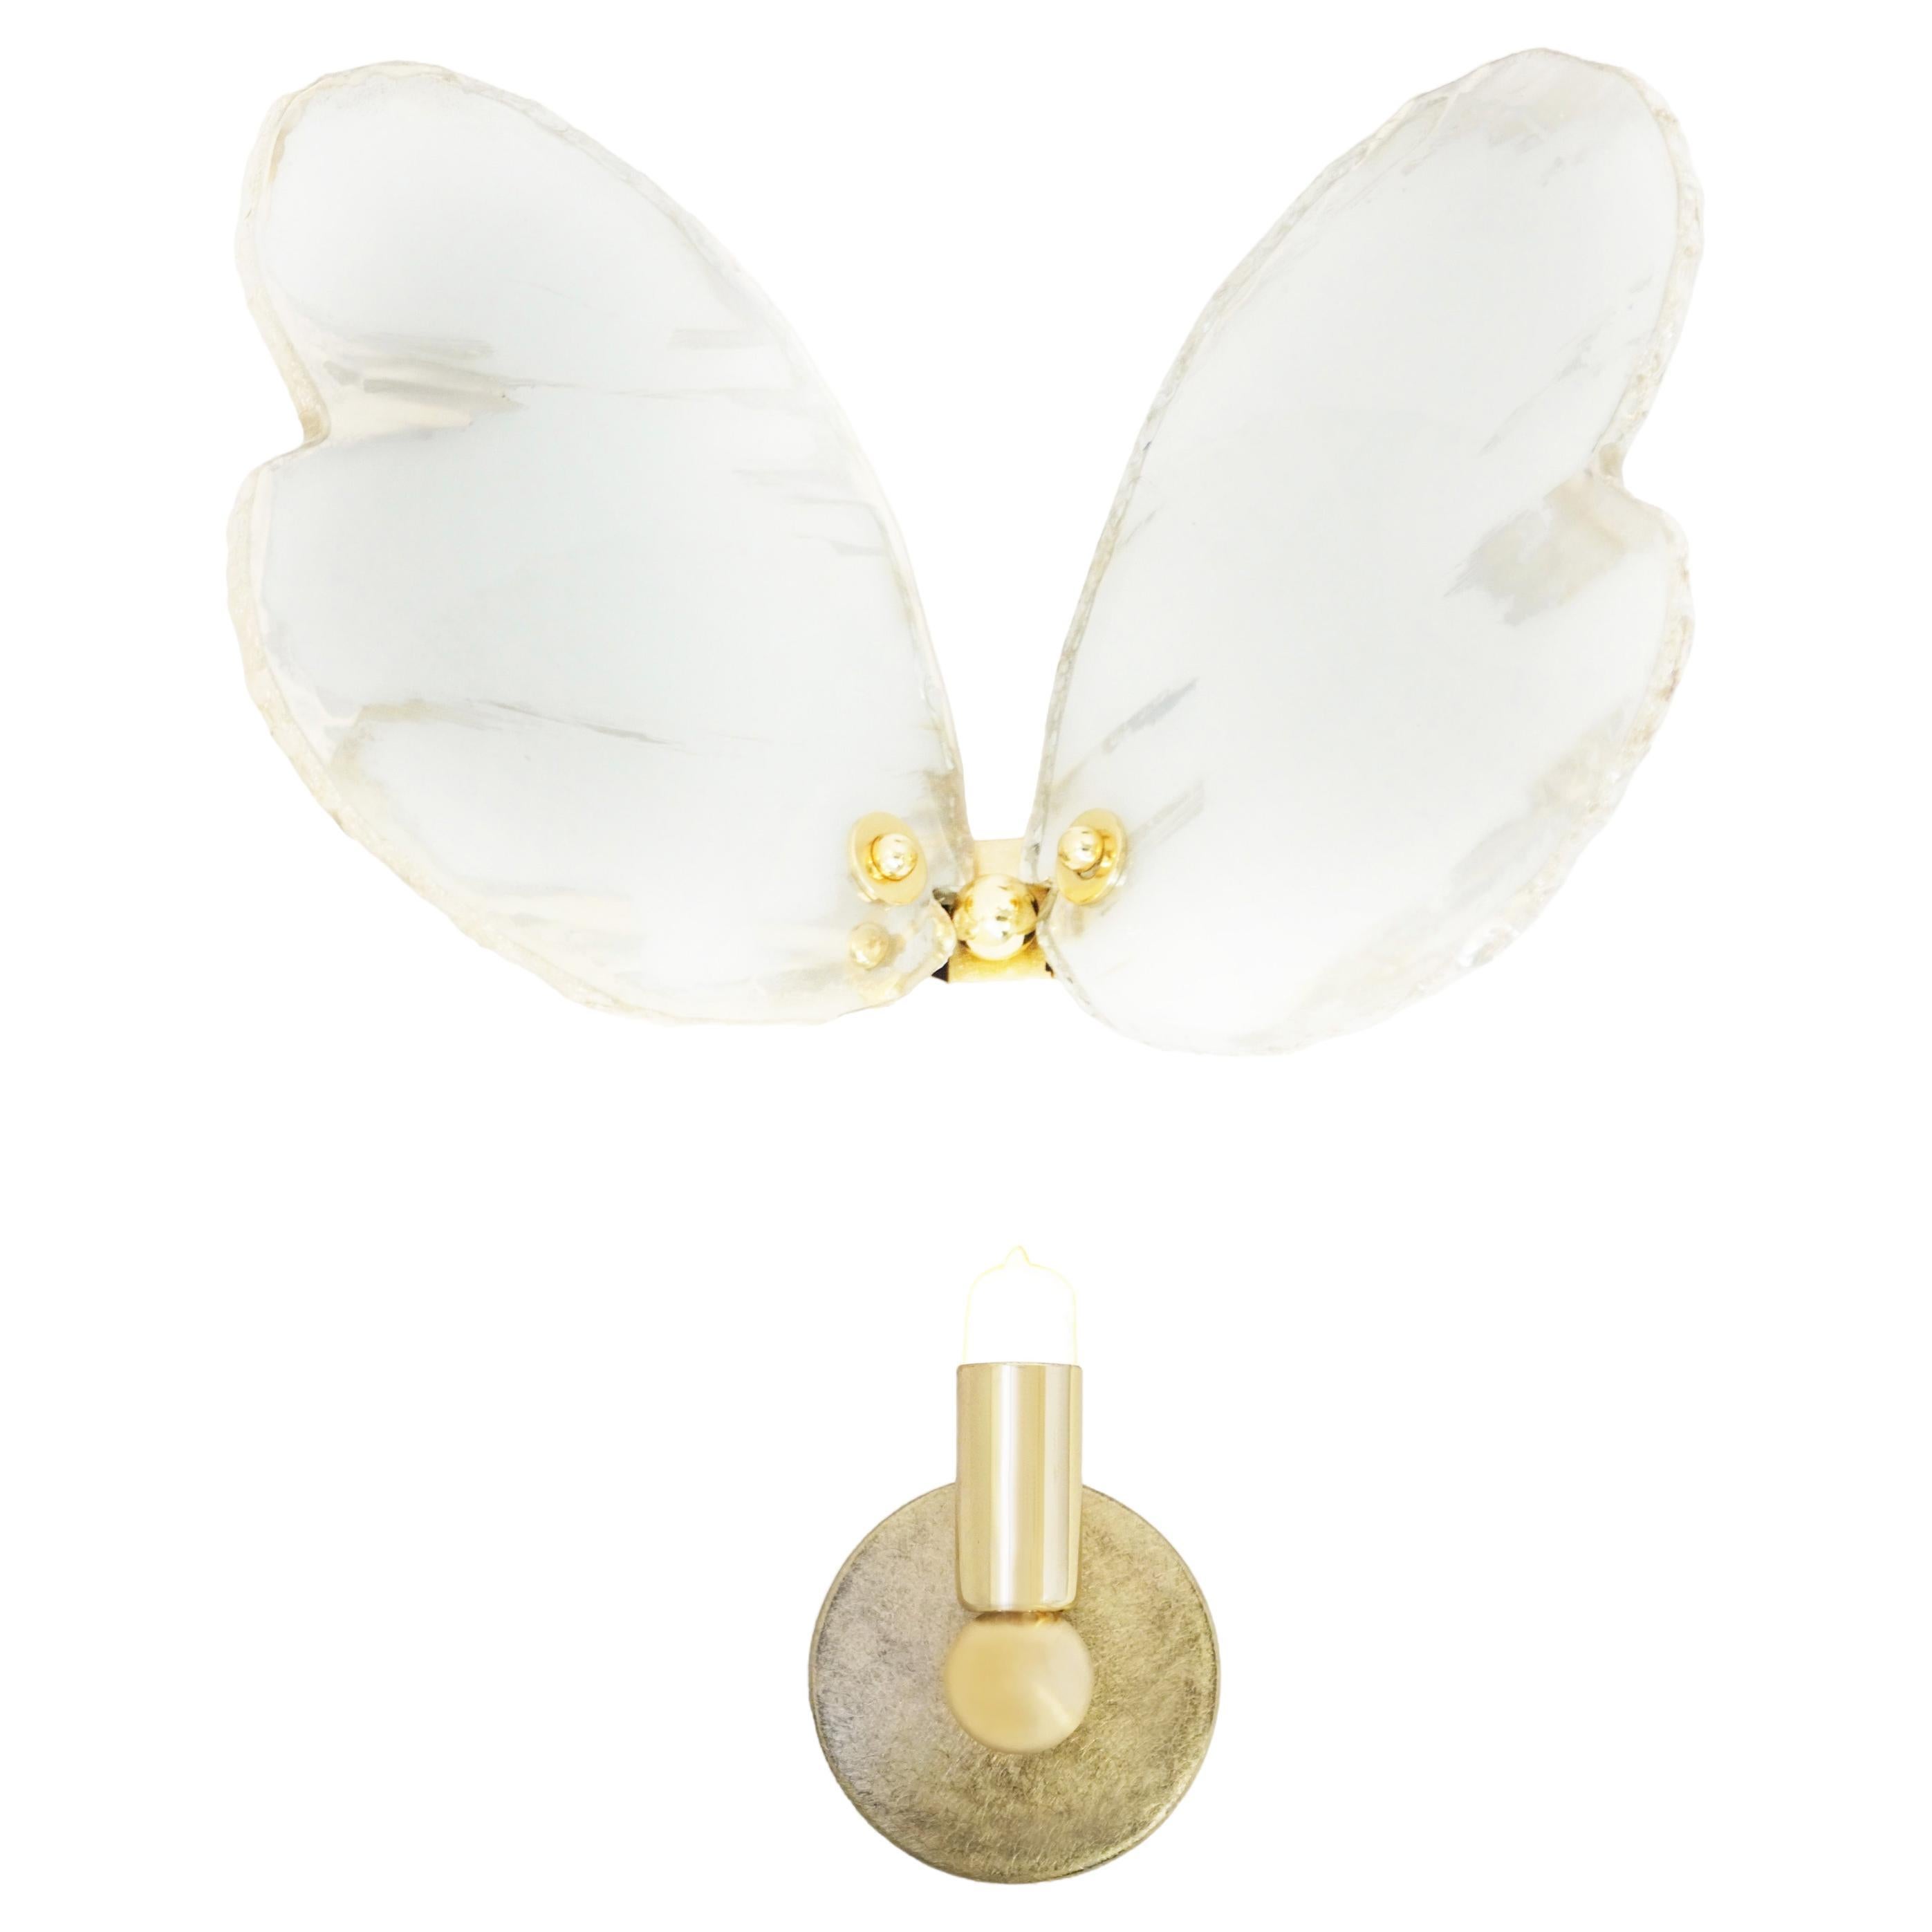  Butterfly Contemporary Wall light sculpture , art Silvered Glass white color   en vente